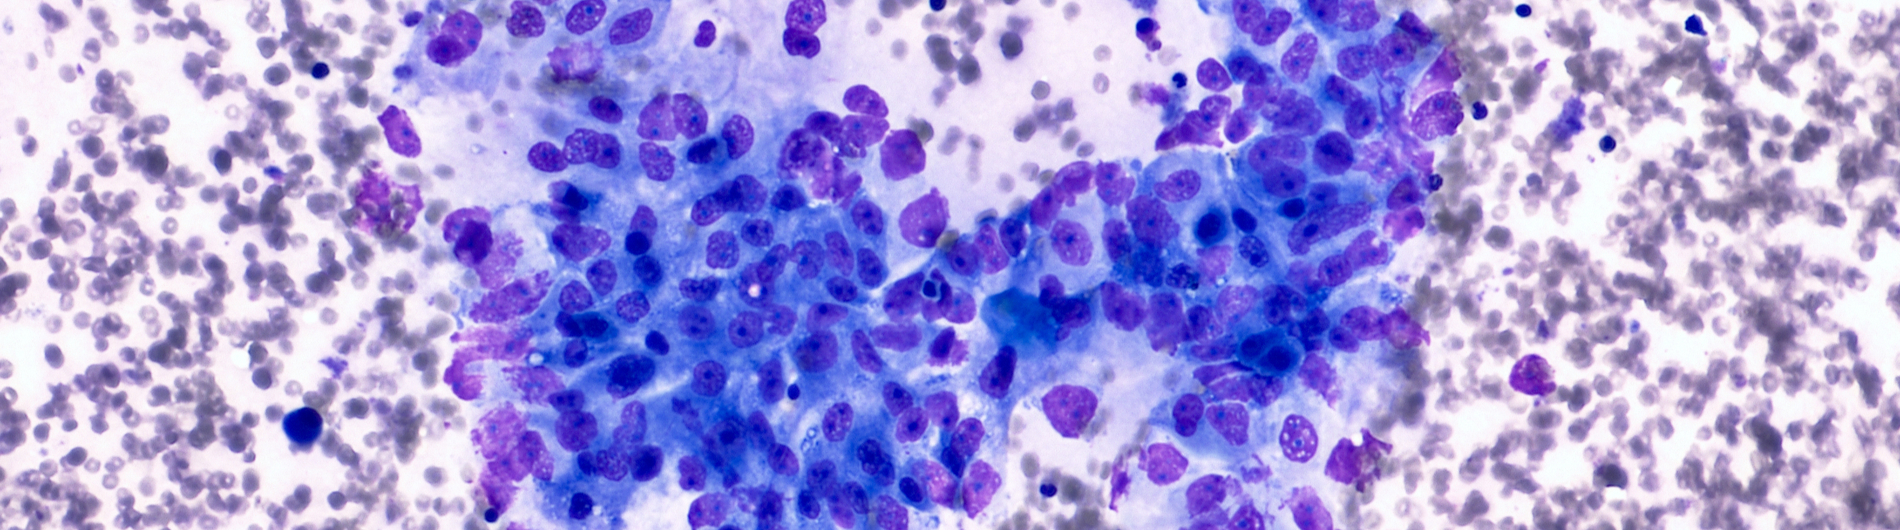 pancreatic cancer cell photo